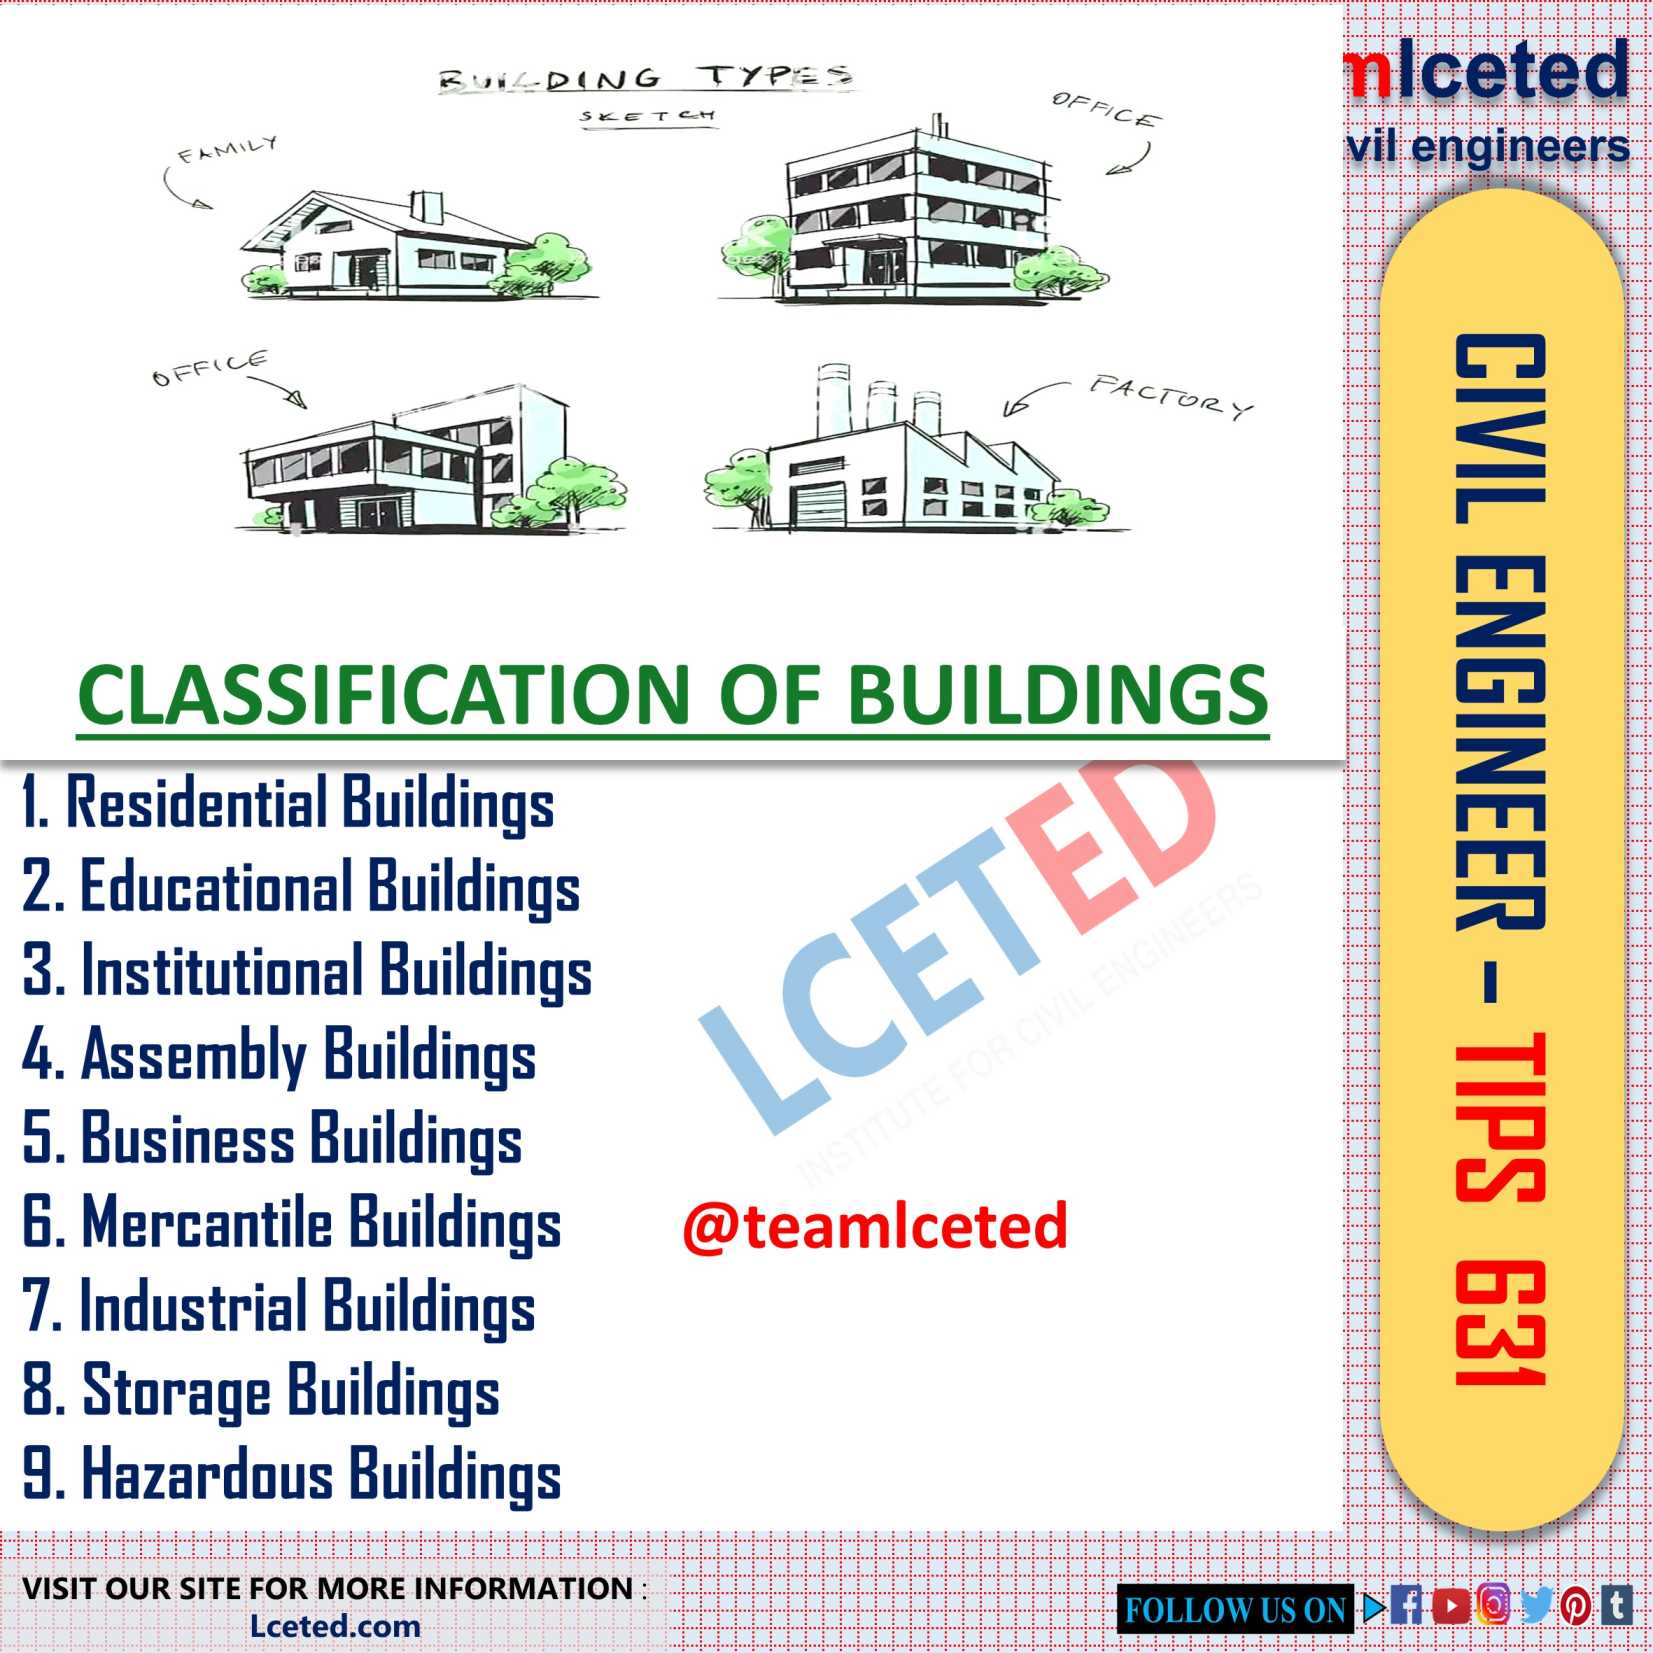 CLASSIFICATION OF BUILDINGS